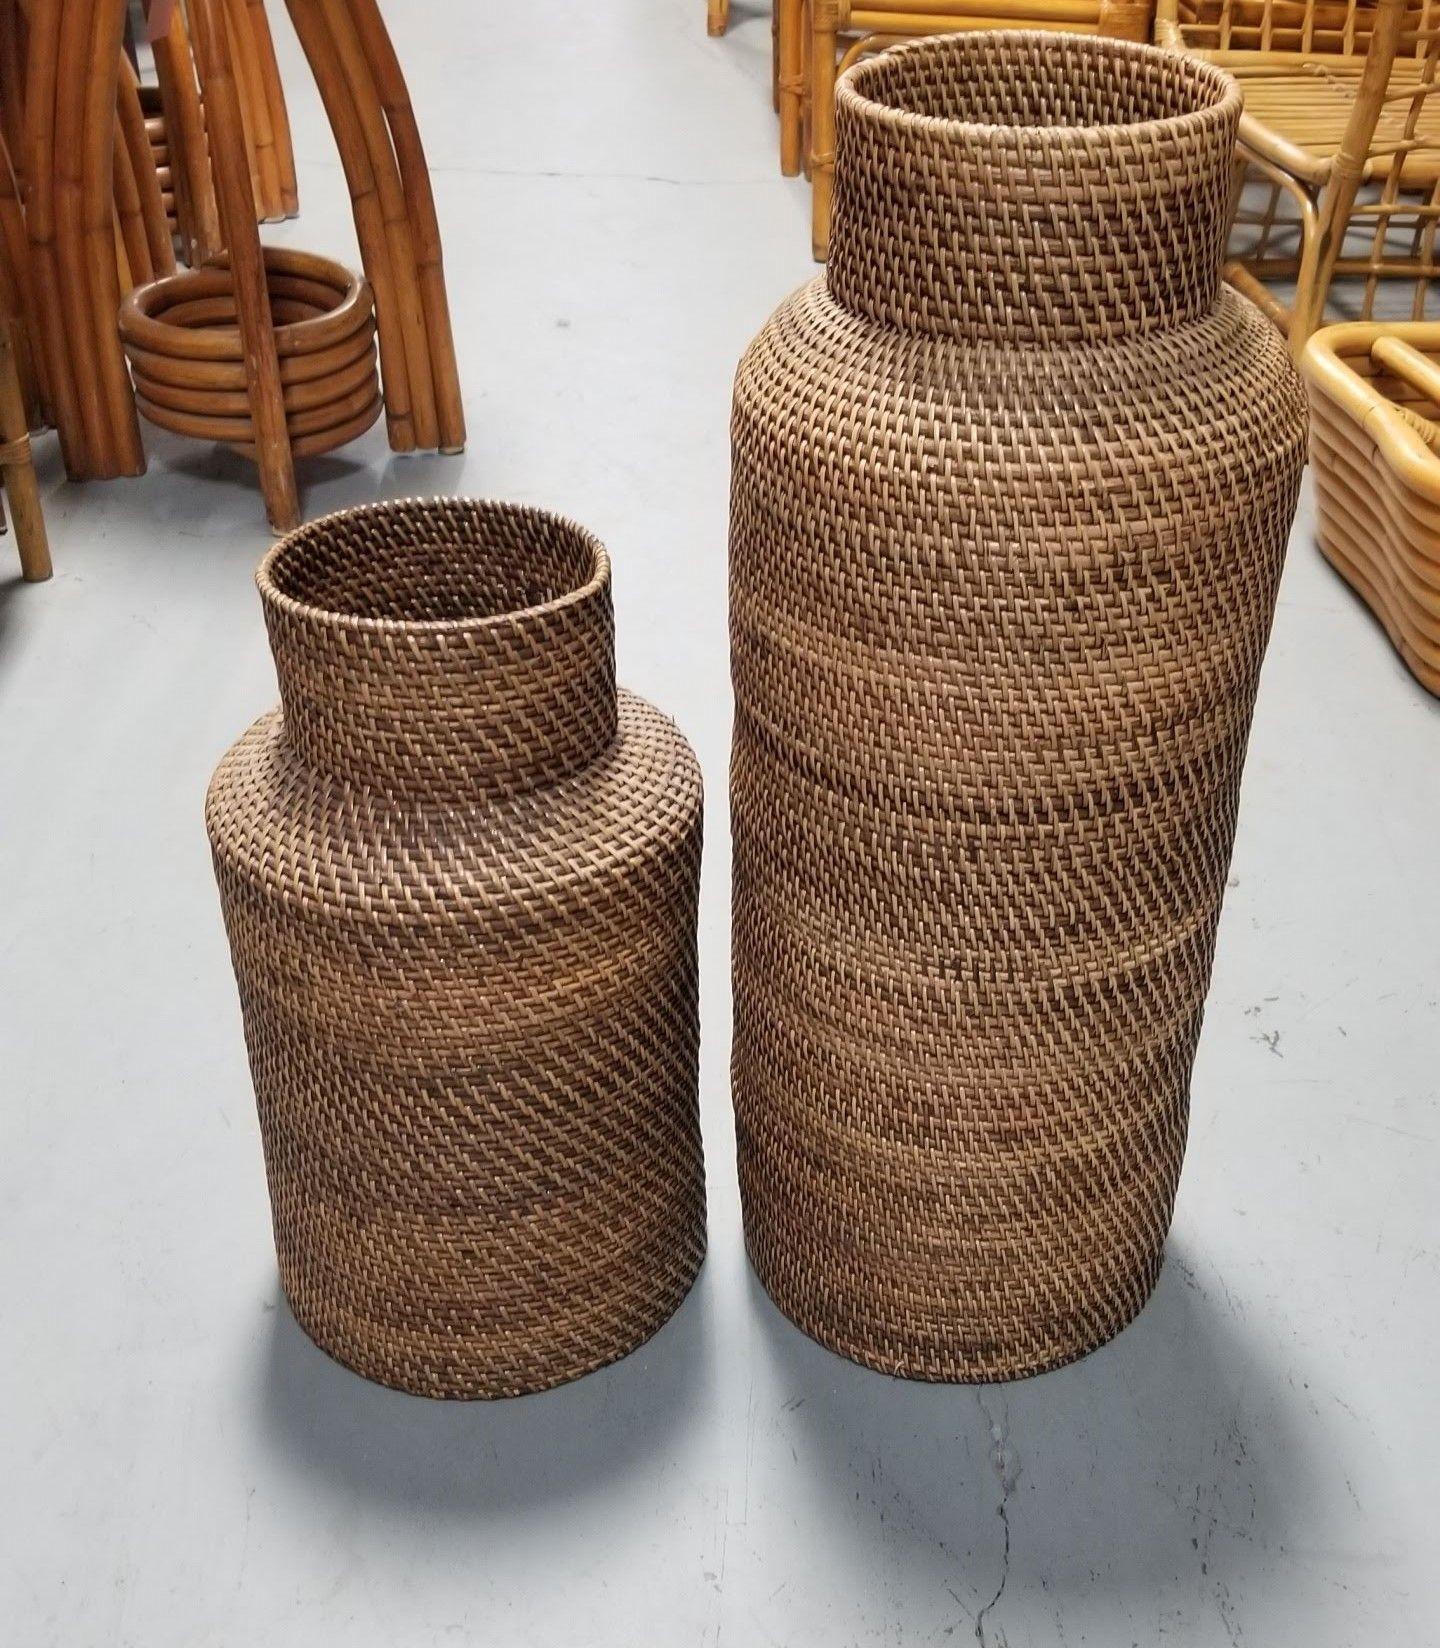 Pair of two Gabriella Crespi-styled decorative floor vases made from stacked reed pencil rattan rings with wicker weave. Perfect for holding dried plant arrangements or simply standing on its own.

Dimensions:

Smaller Vase: 19.5